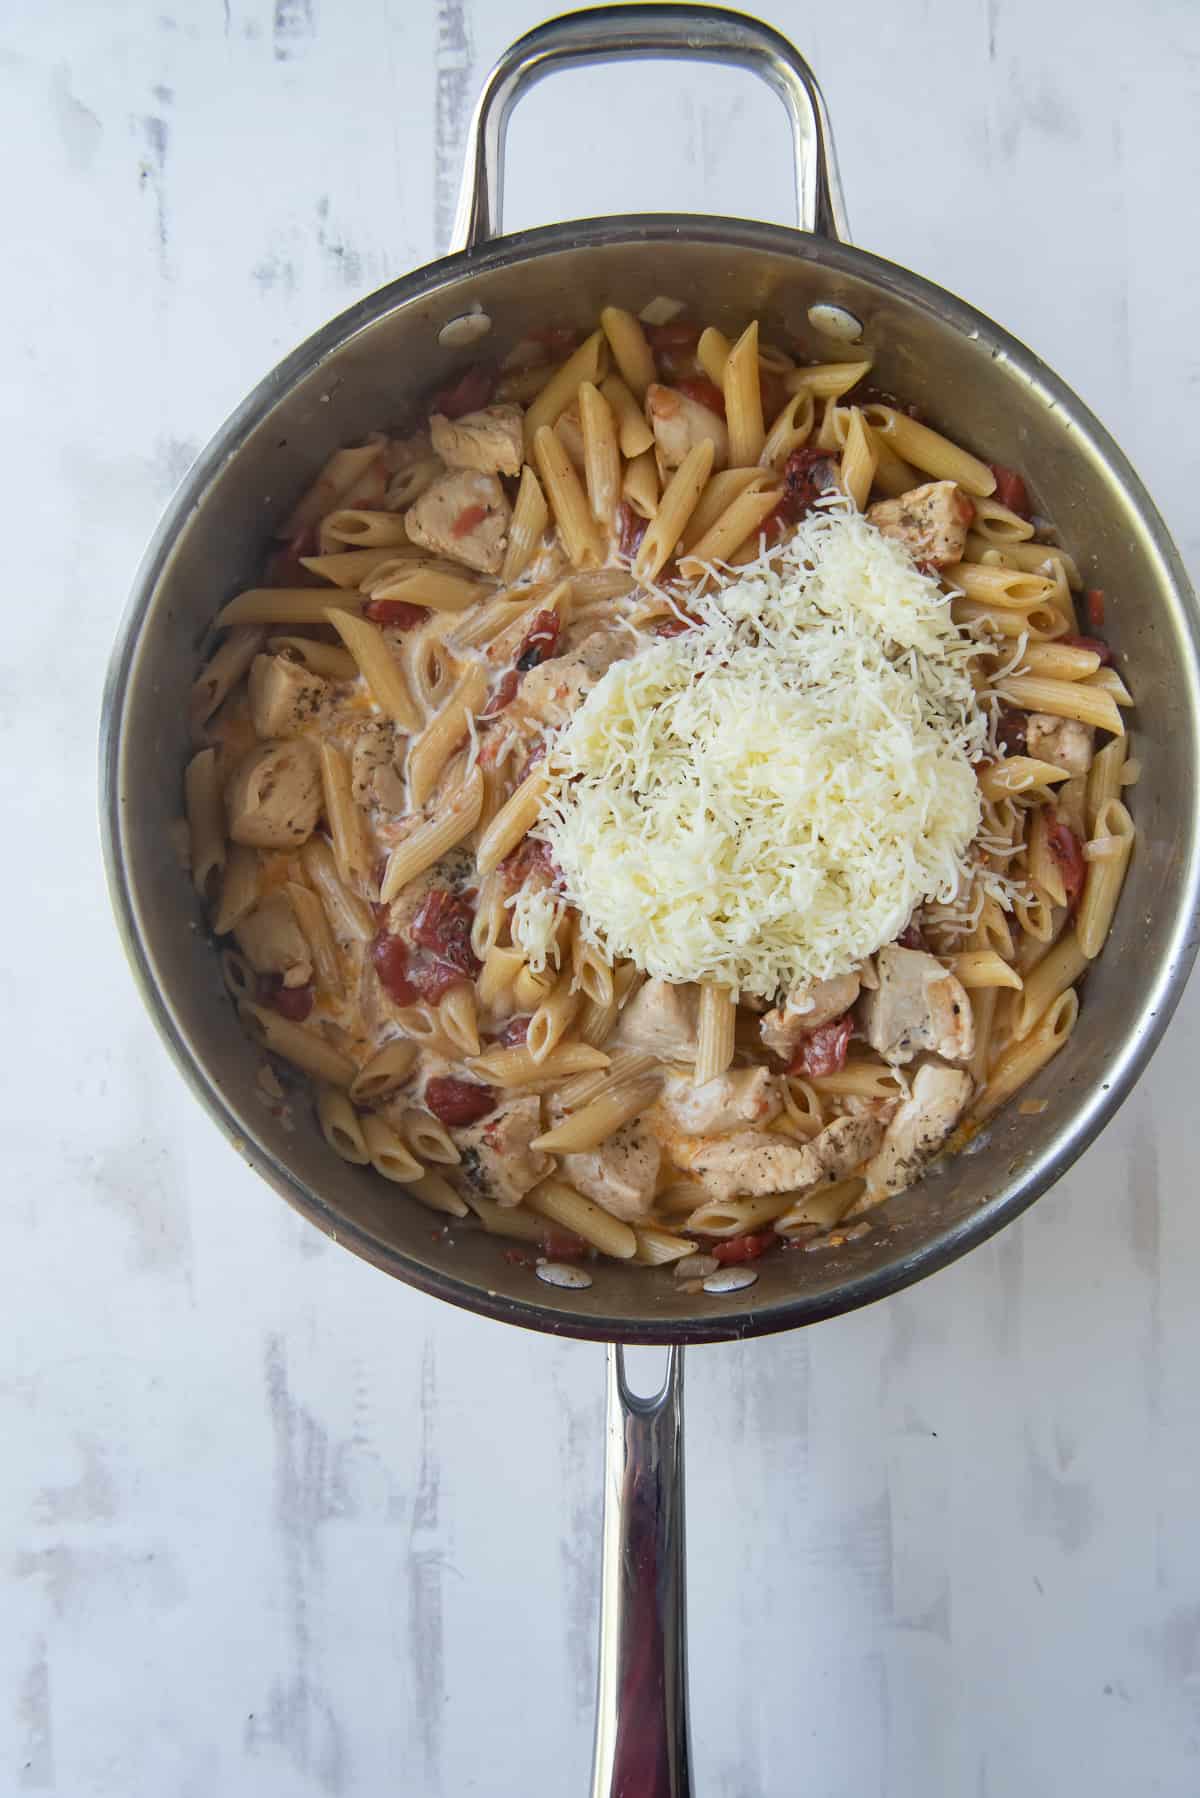 Cheese and cream added to cooked pasta in a skillet.